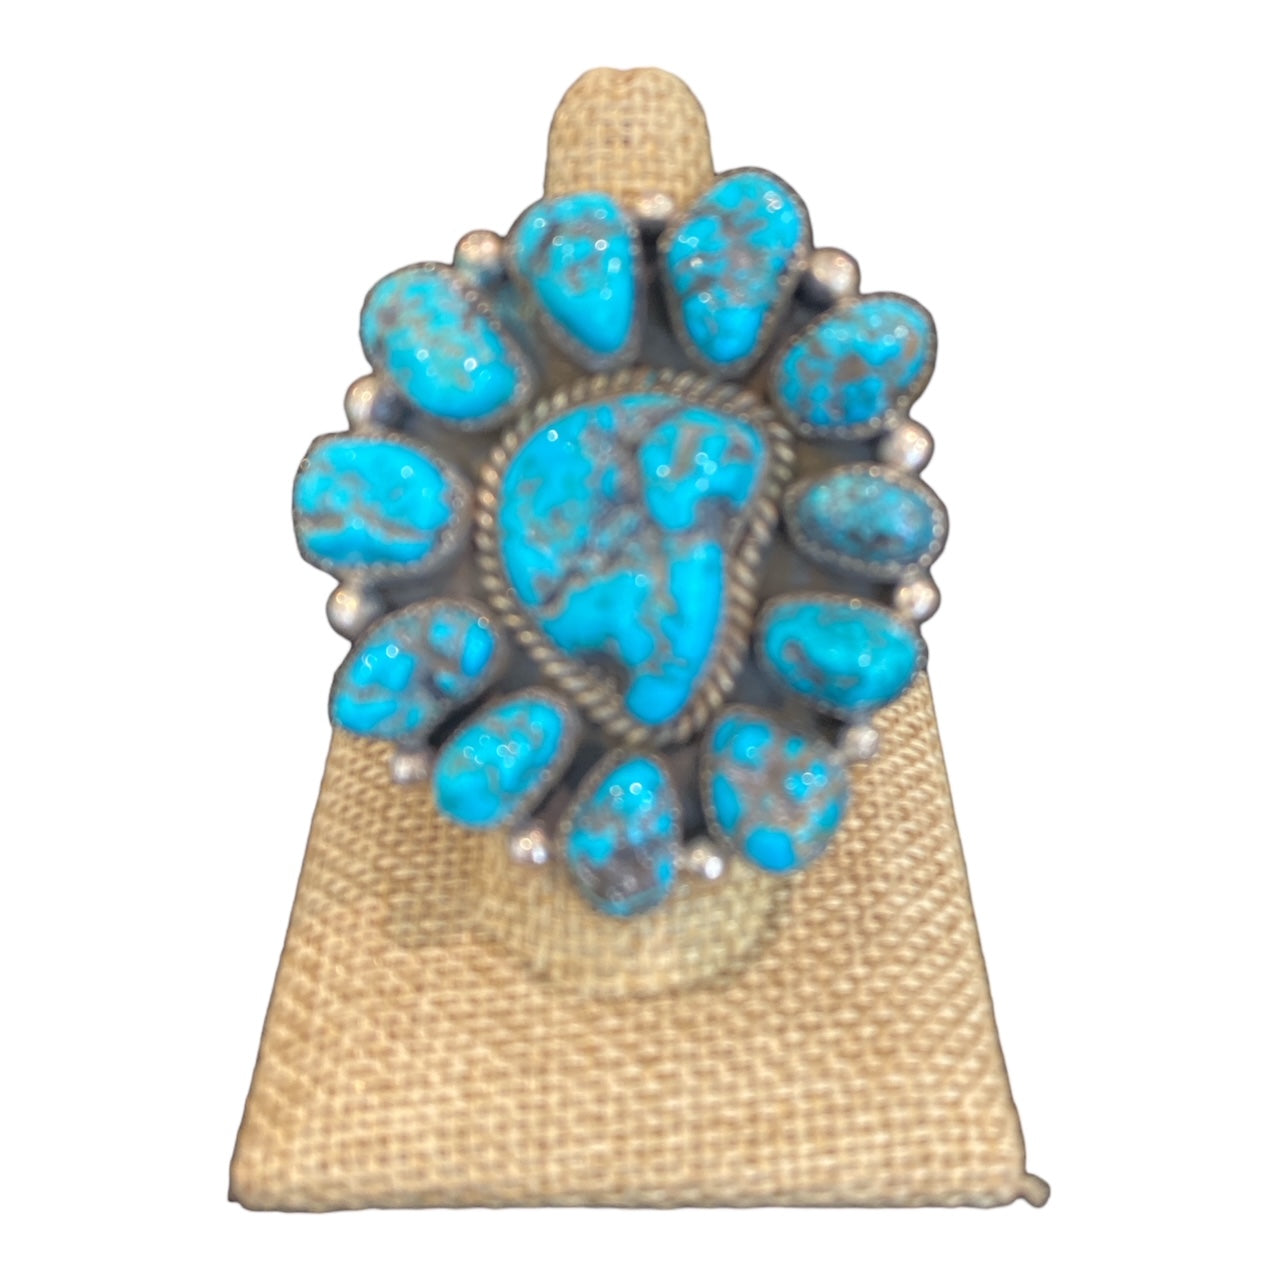 Navajo turquoise jewelry, sterling silver jewelry, telluride